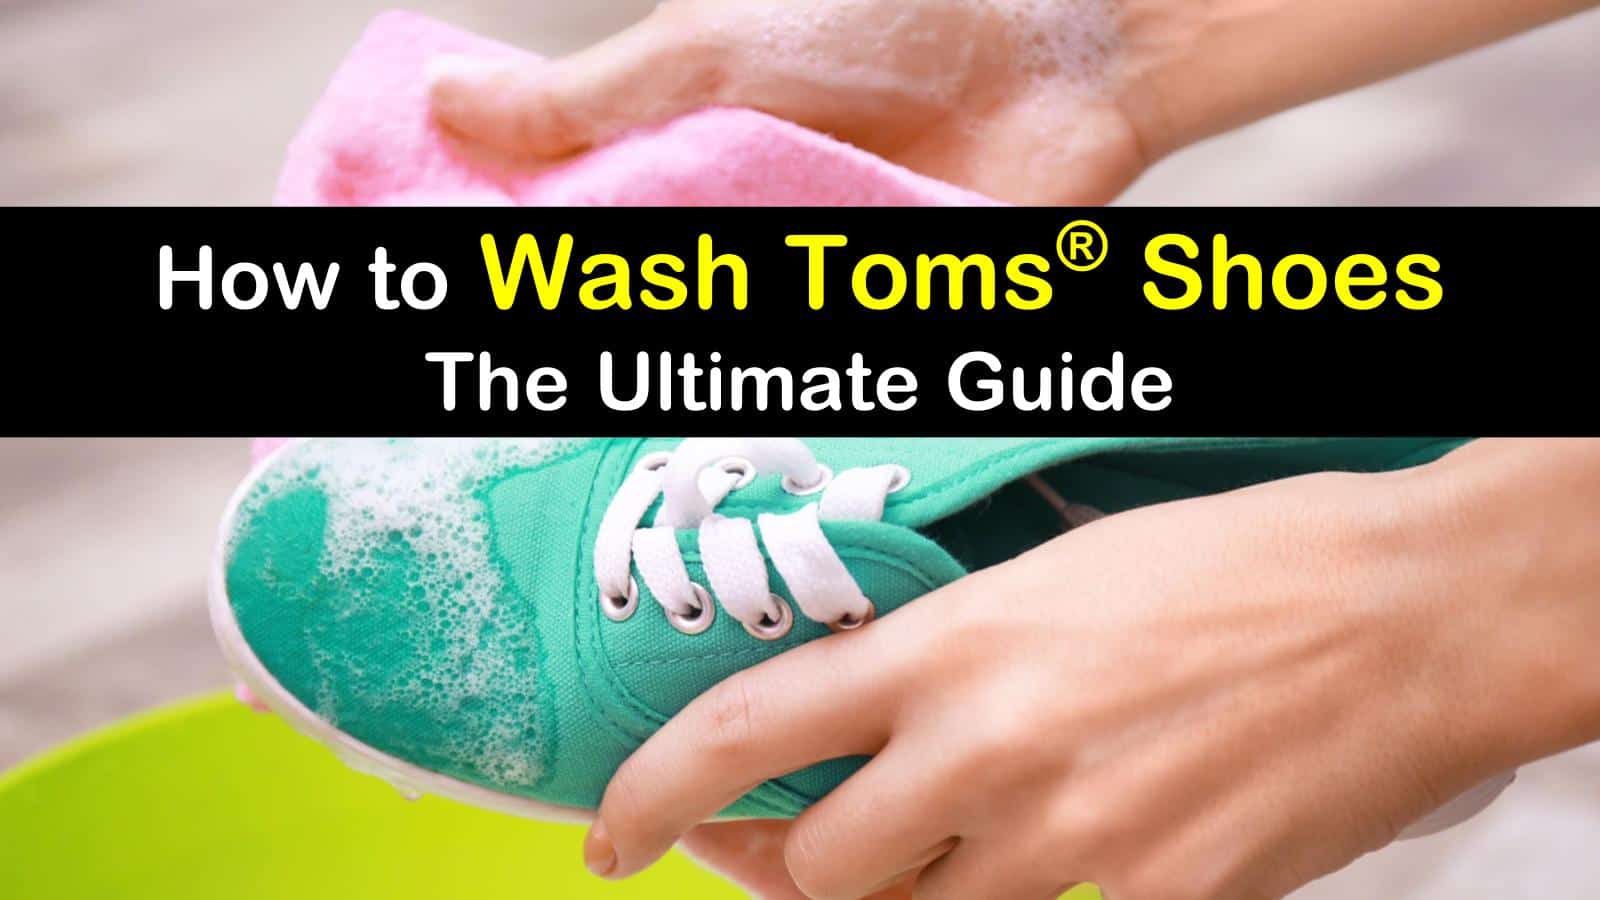 How to Wash Toms Shoes titleimg1